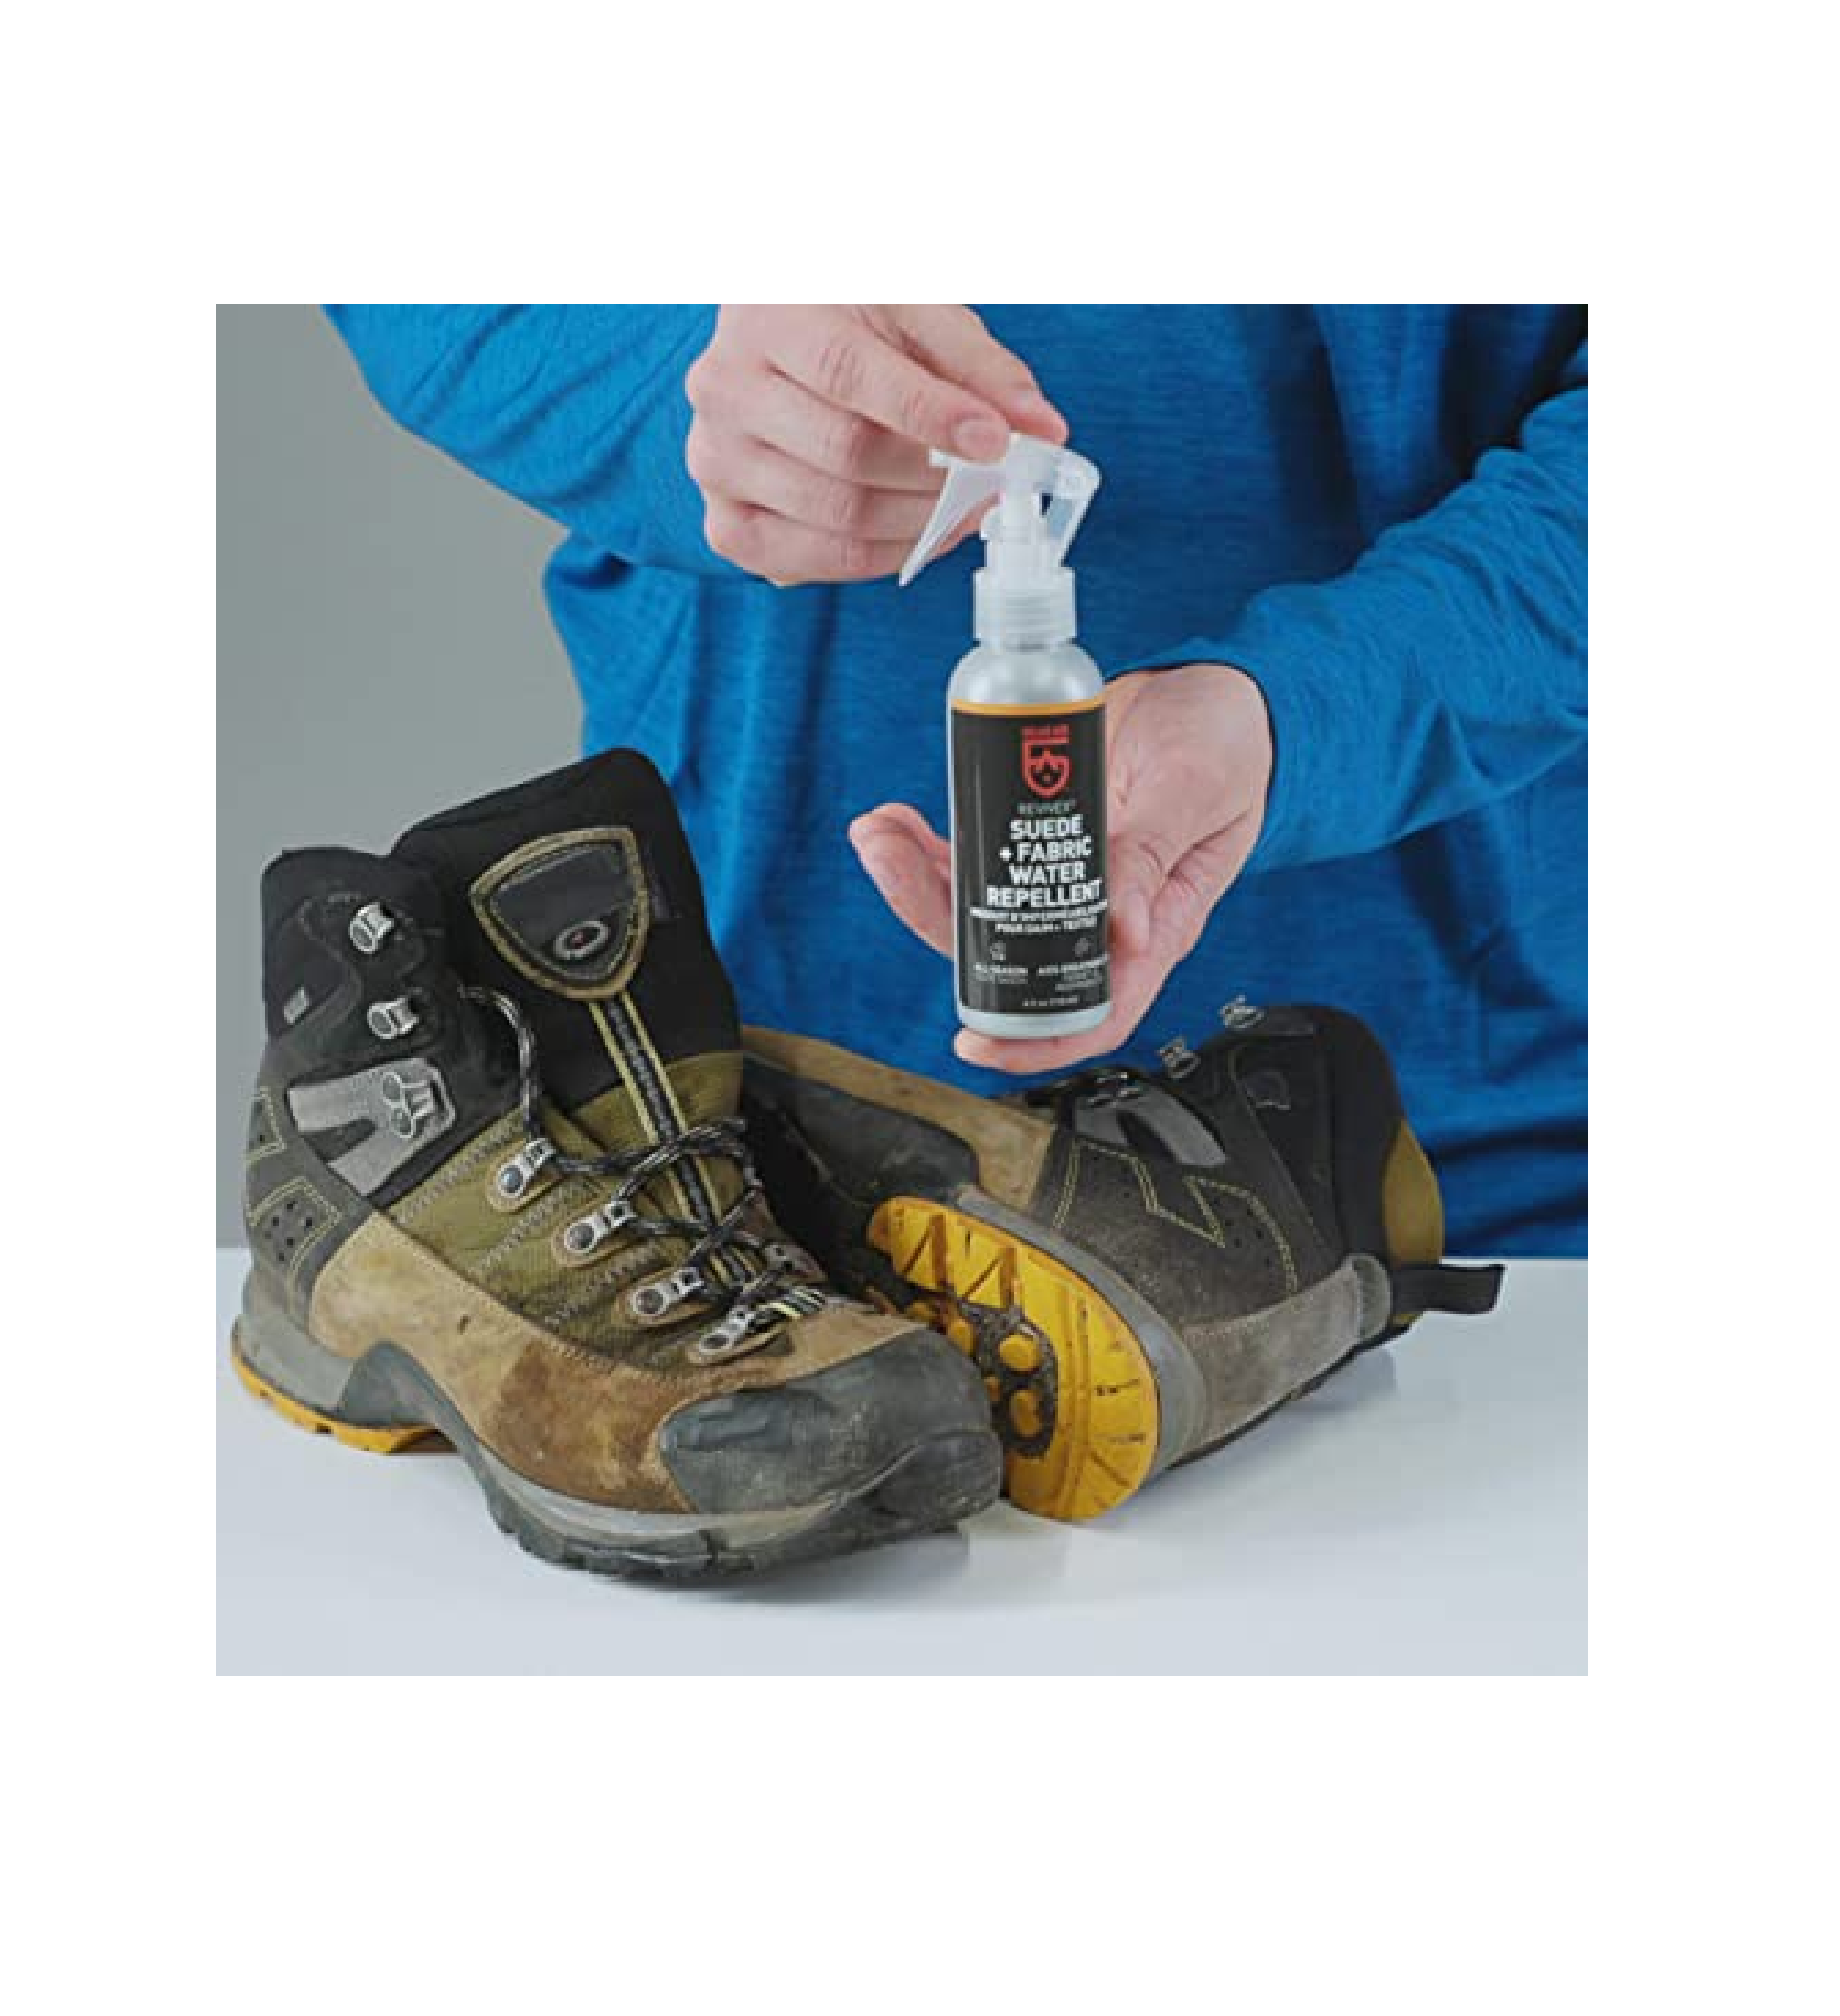 Gear Aid Revivex Spray - Nubuck, Suede & Fabric Water Repellent,  Boots/Shoes